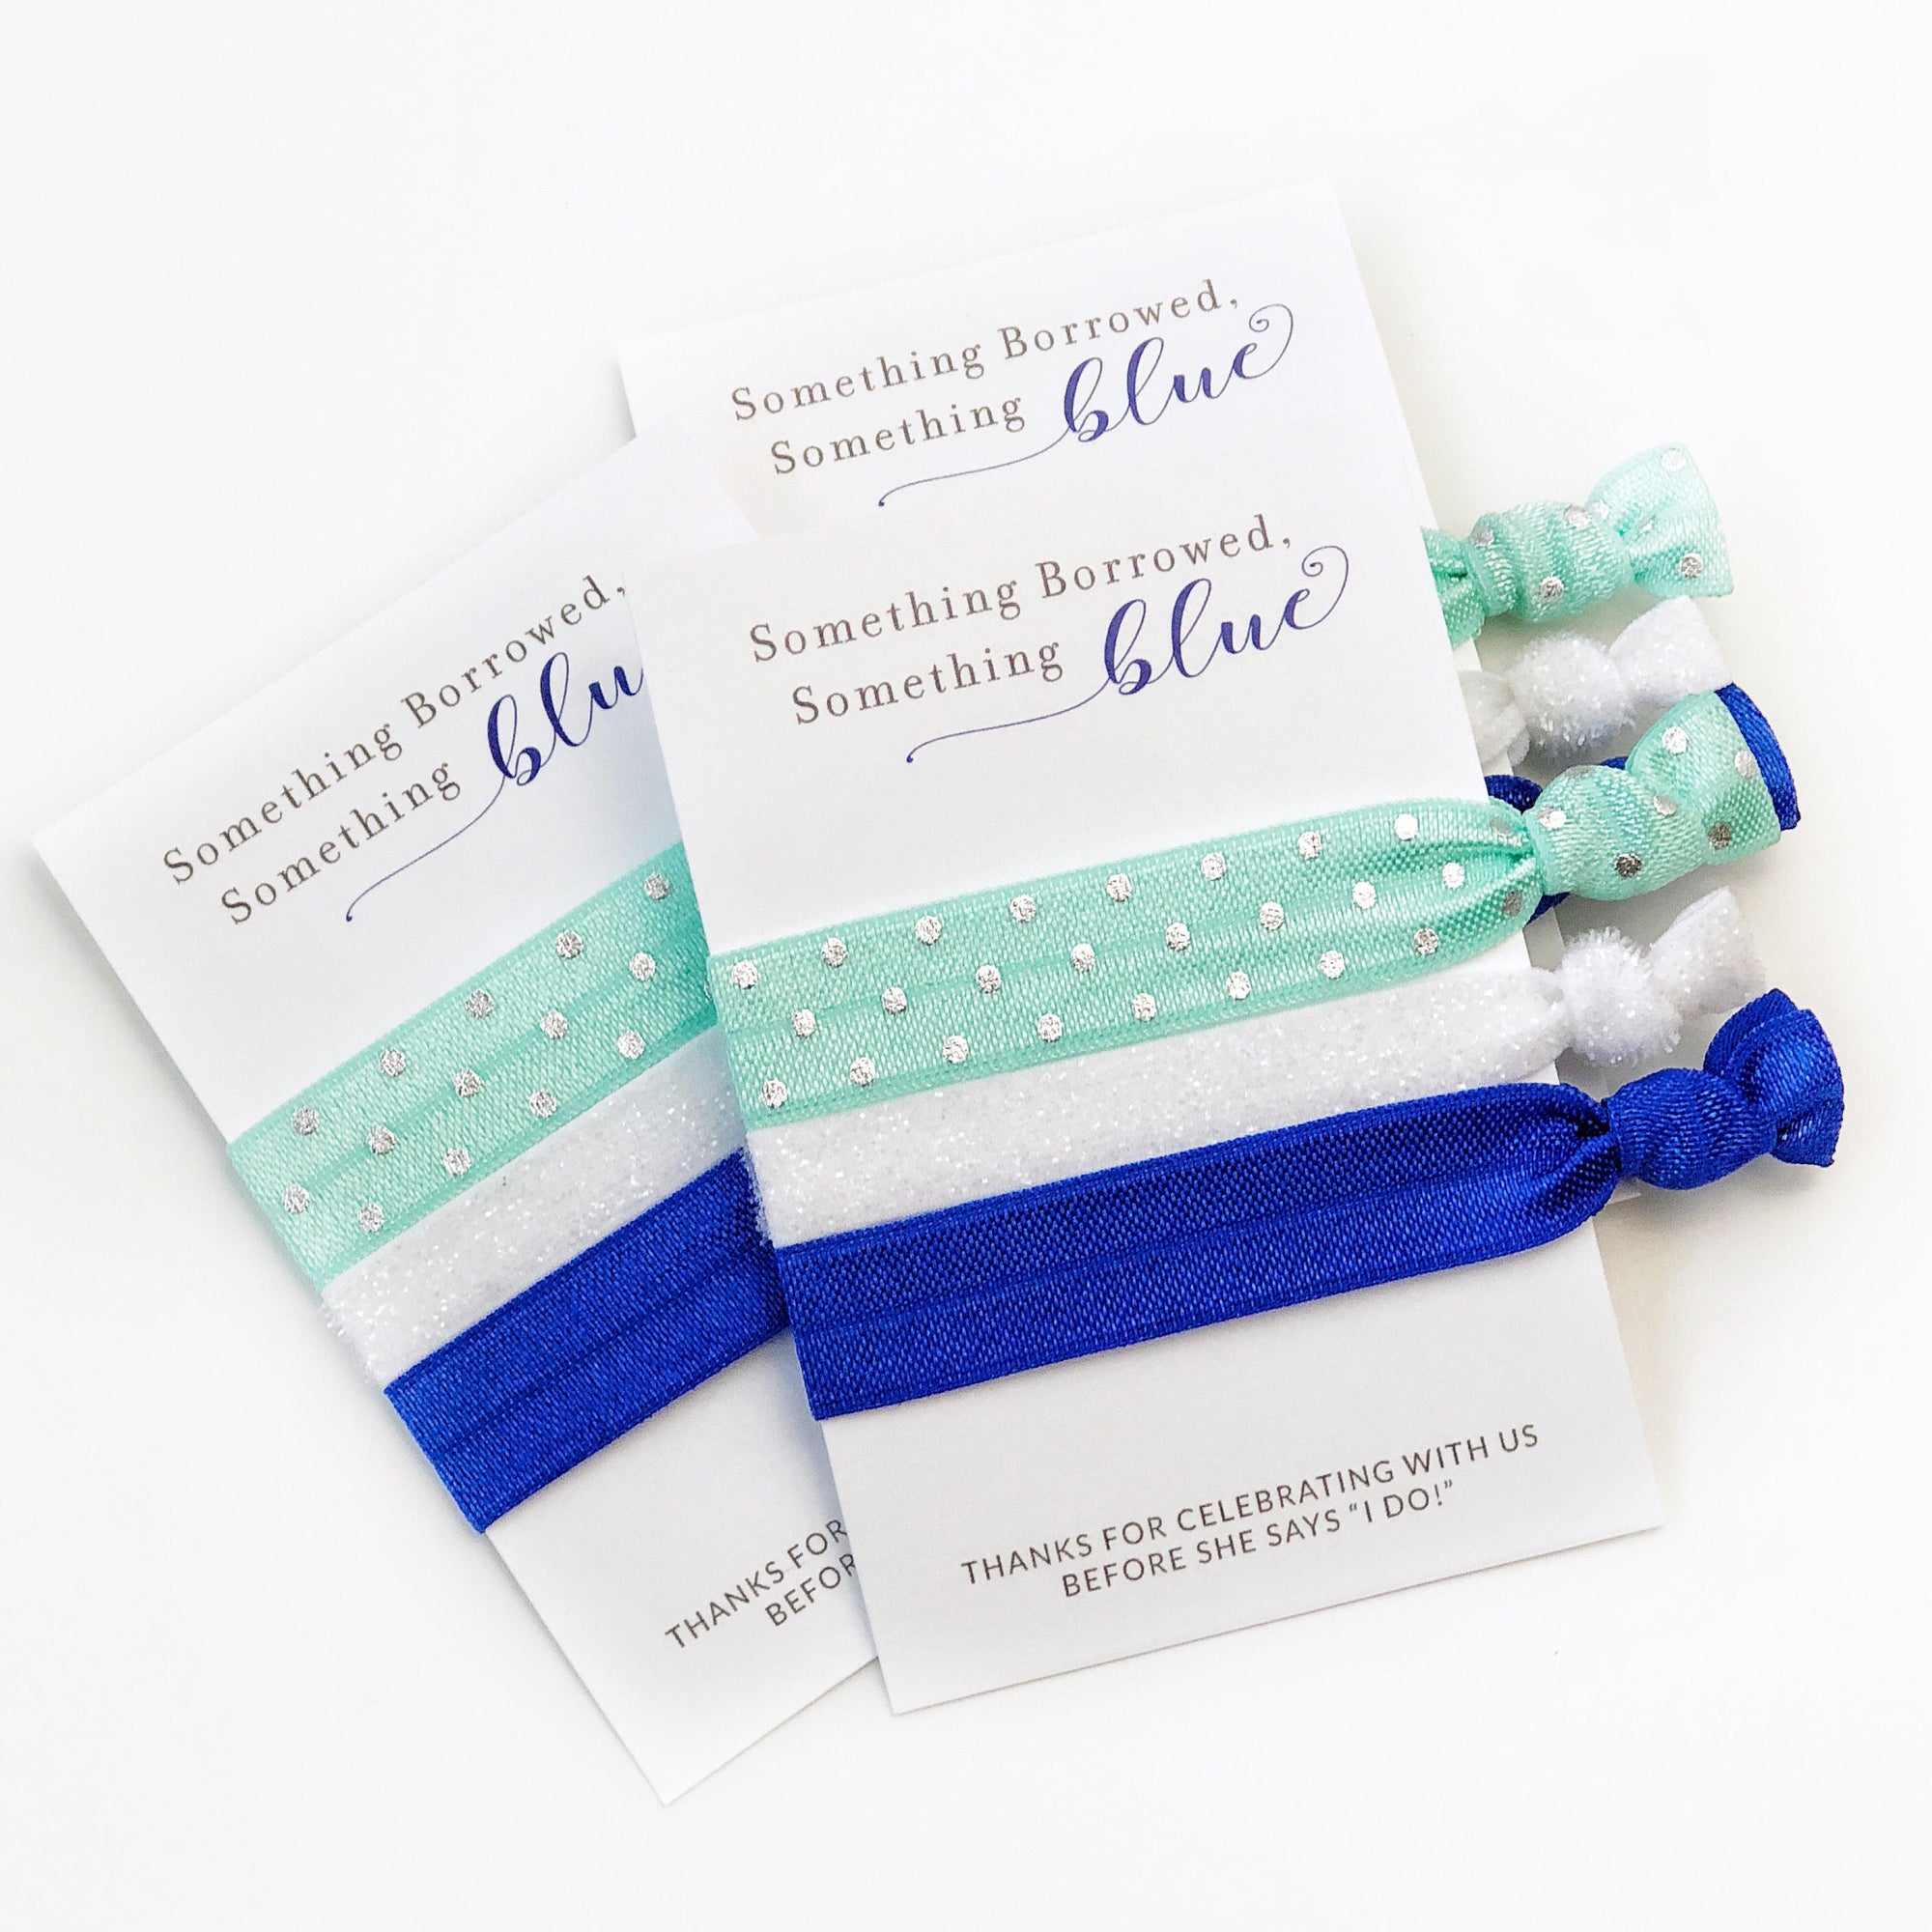 Something Blue Bridal Shower and Bachelorette Party Favors - Small Gifts - @PlumPolkaDot 